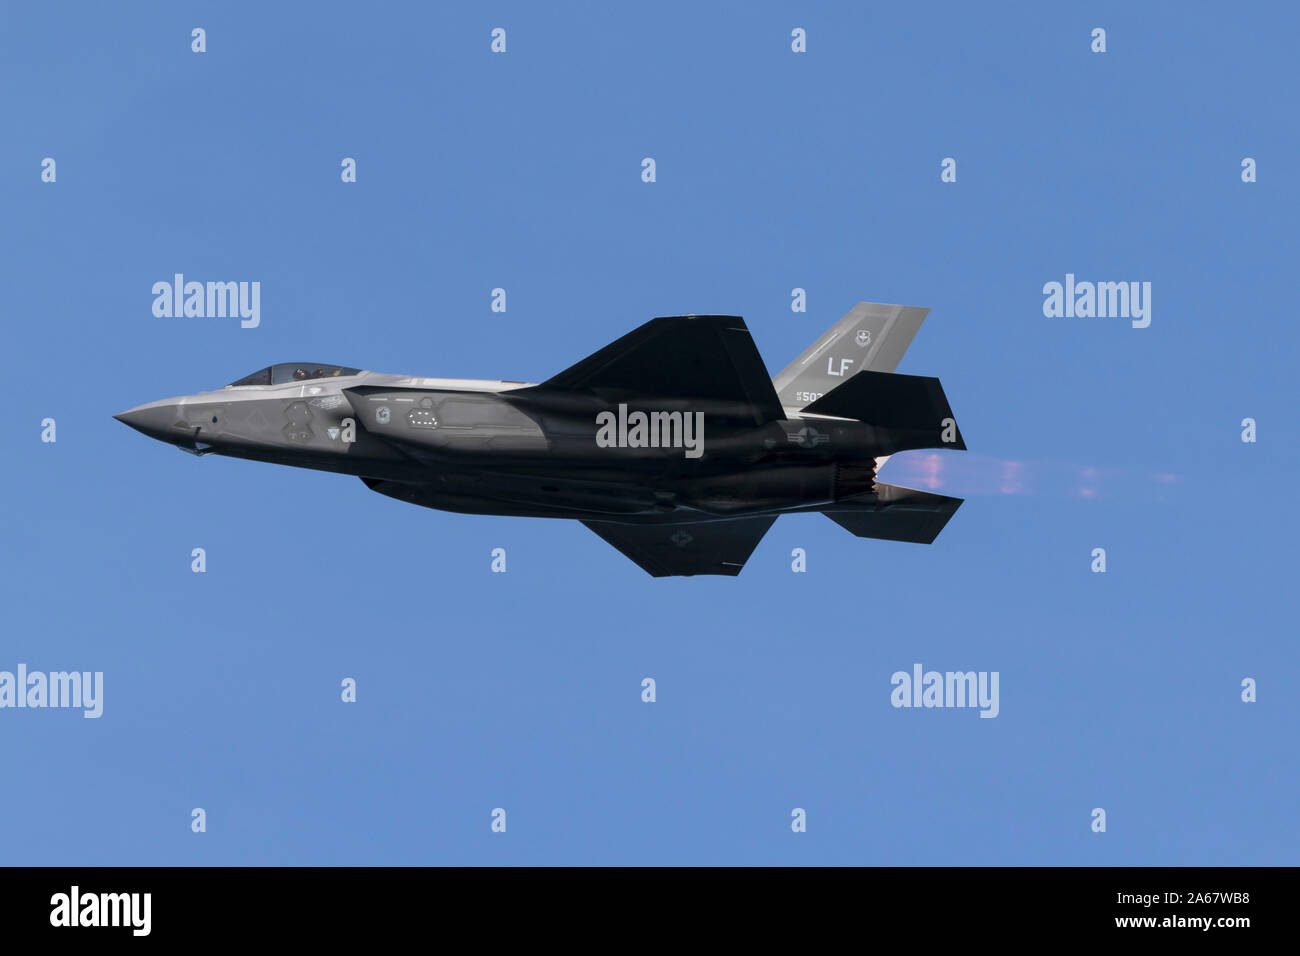 United States Air Force Lockheed Martin F-35 Lightning II fifth generation fighter in postcombustore. Foto Stock